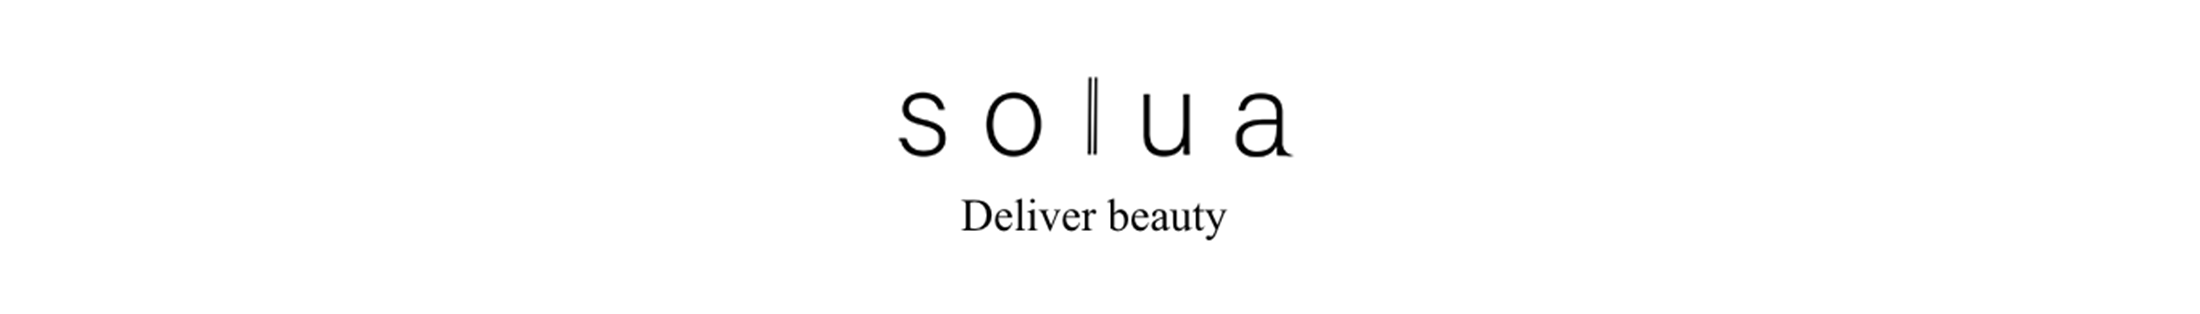 solua Deliver beauty